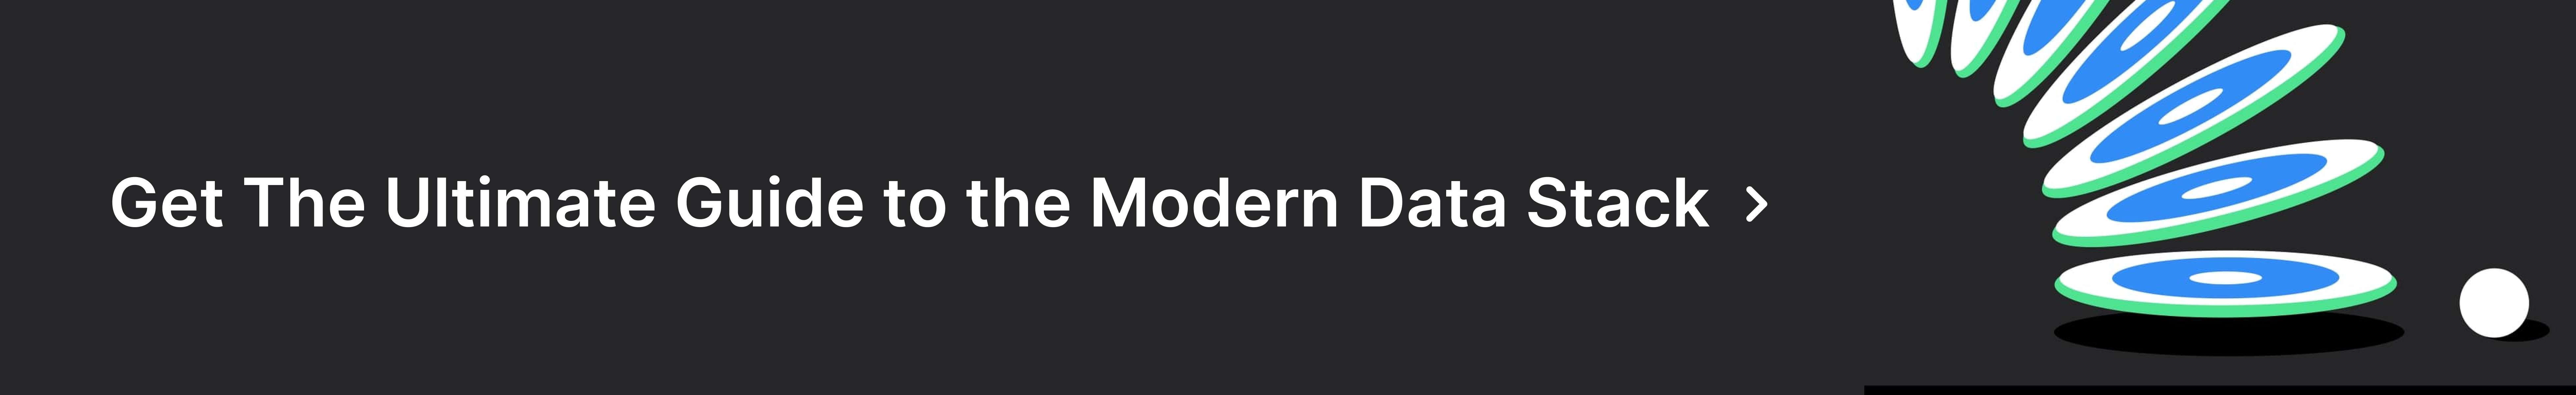 Get The Ultimate Guide to the Modern Data Stack